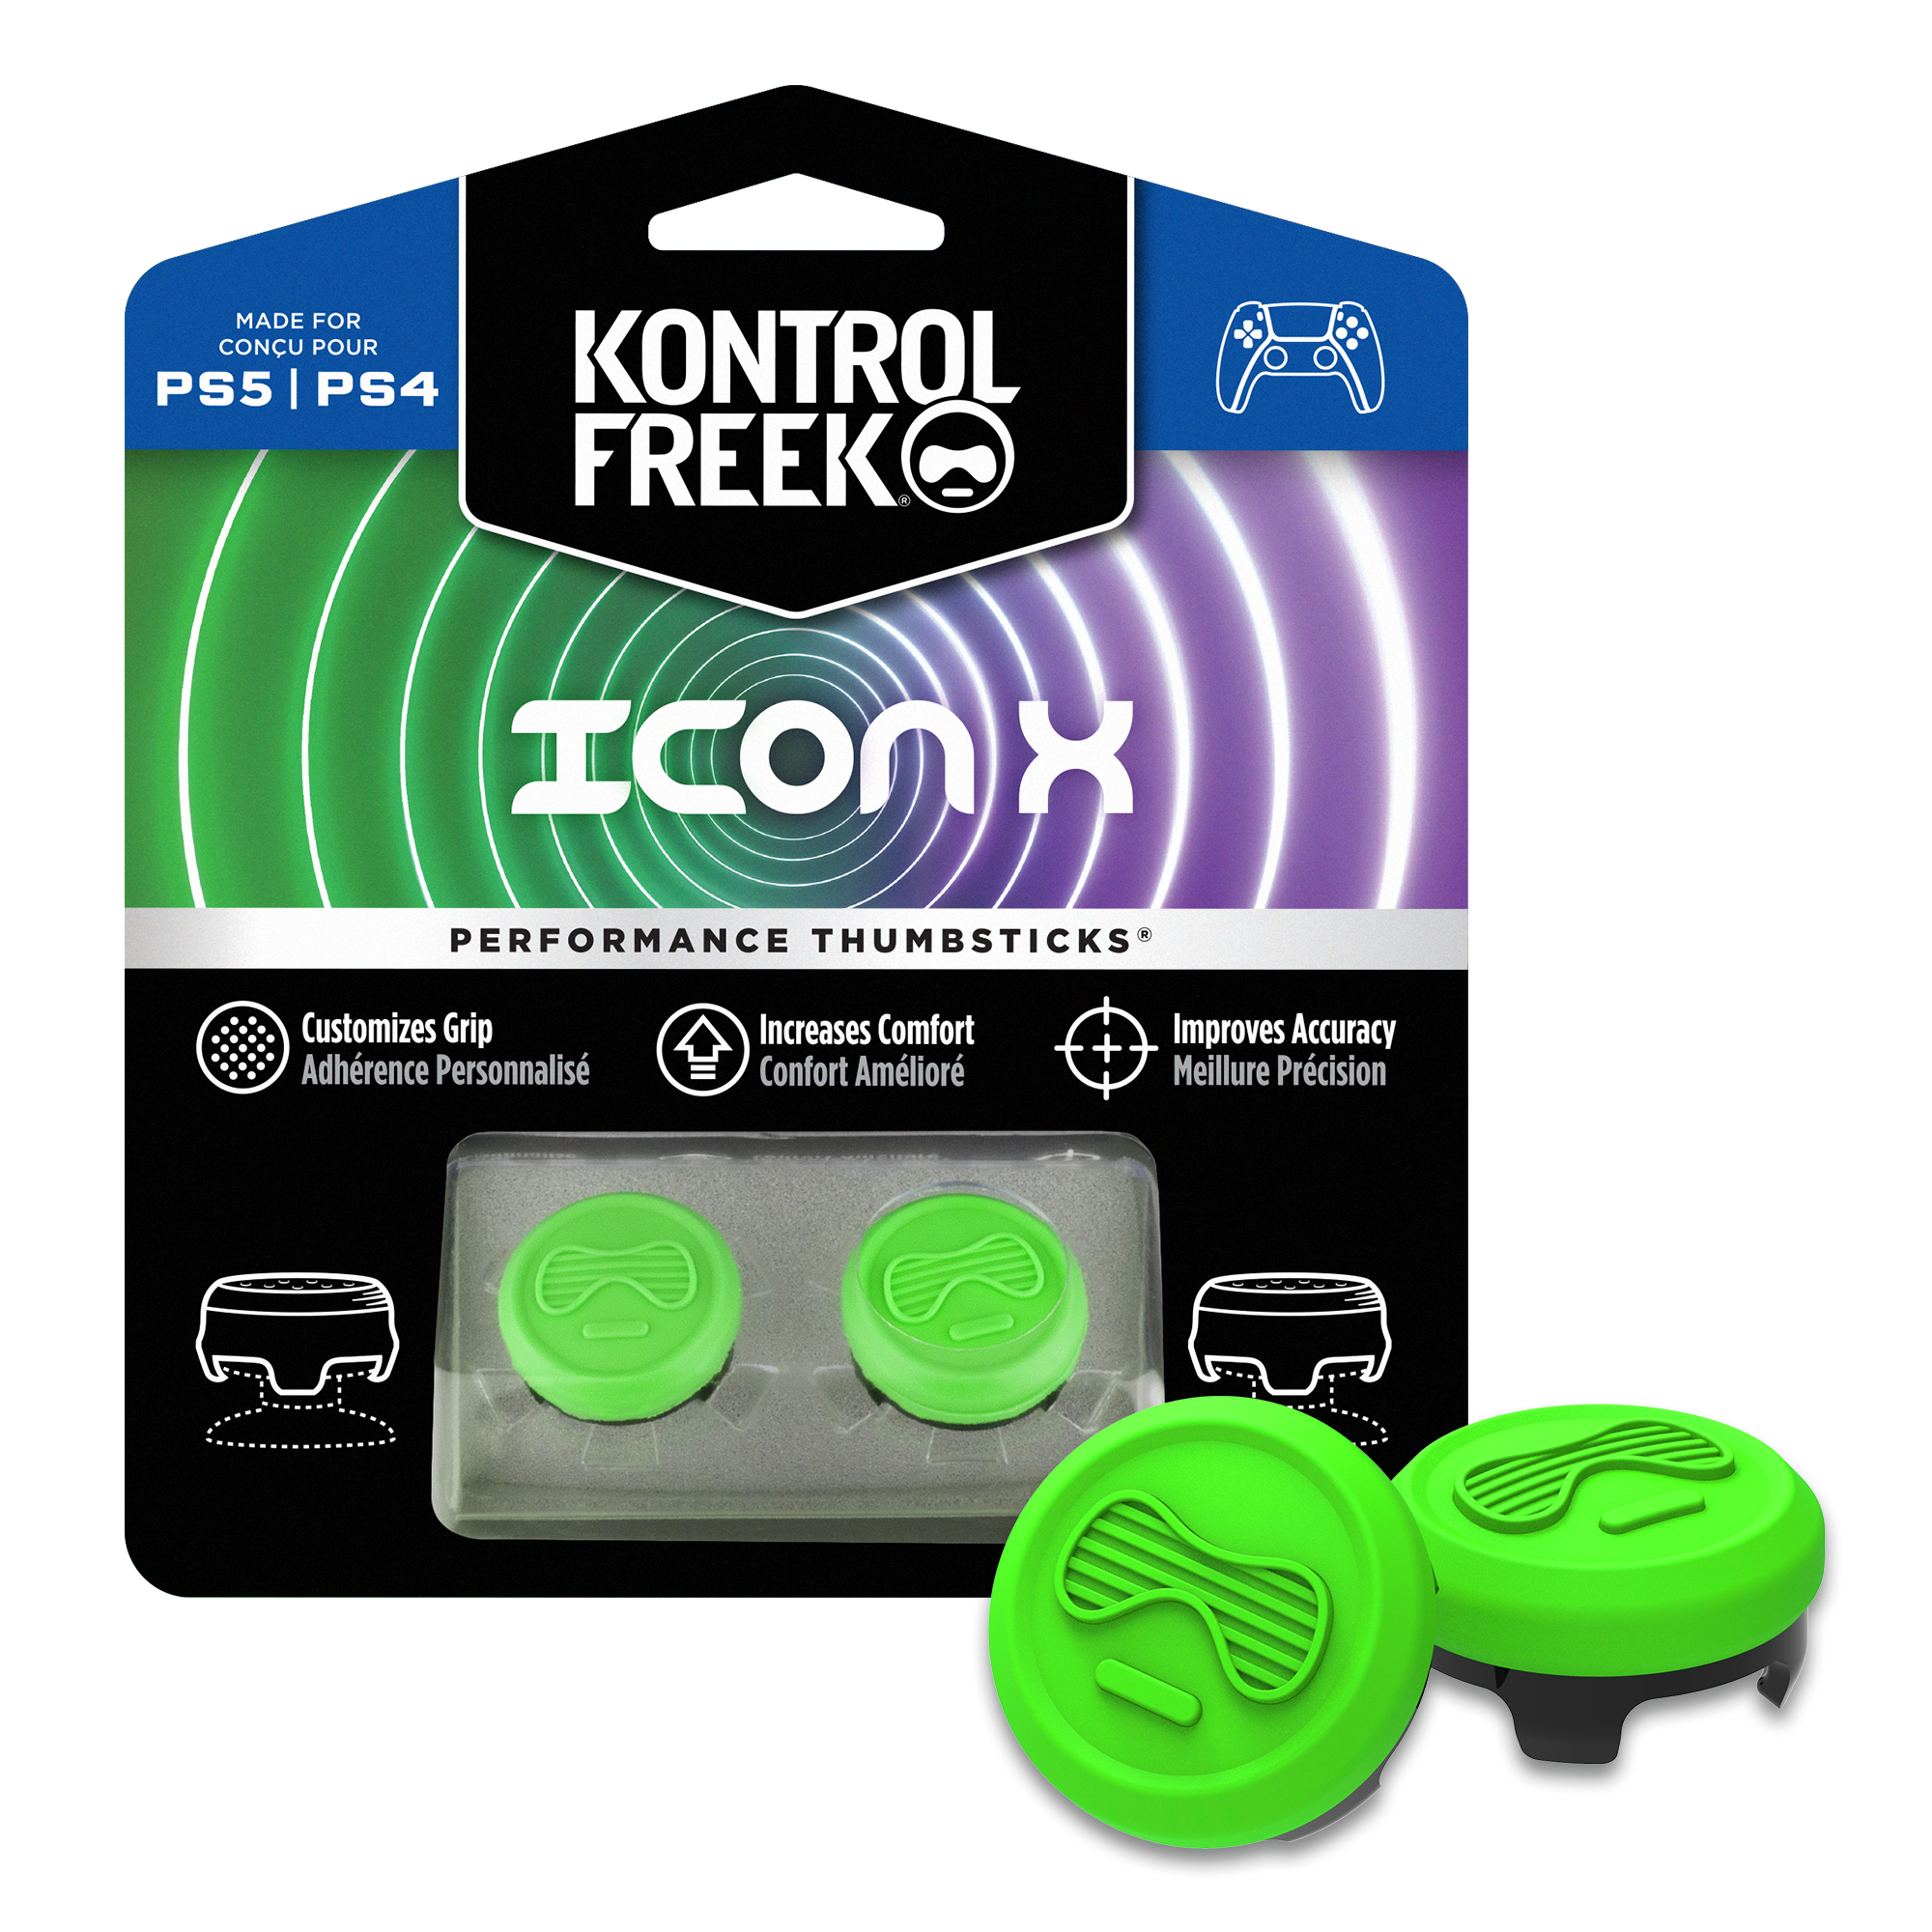 IconX-Green-PS5-2000x2000.png